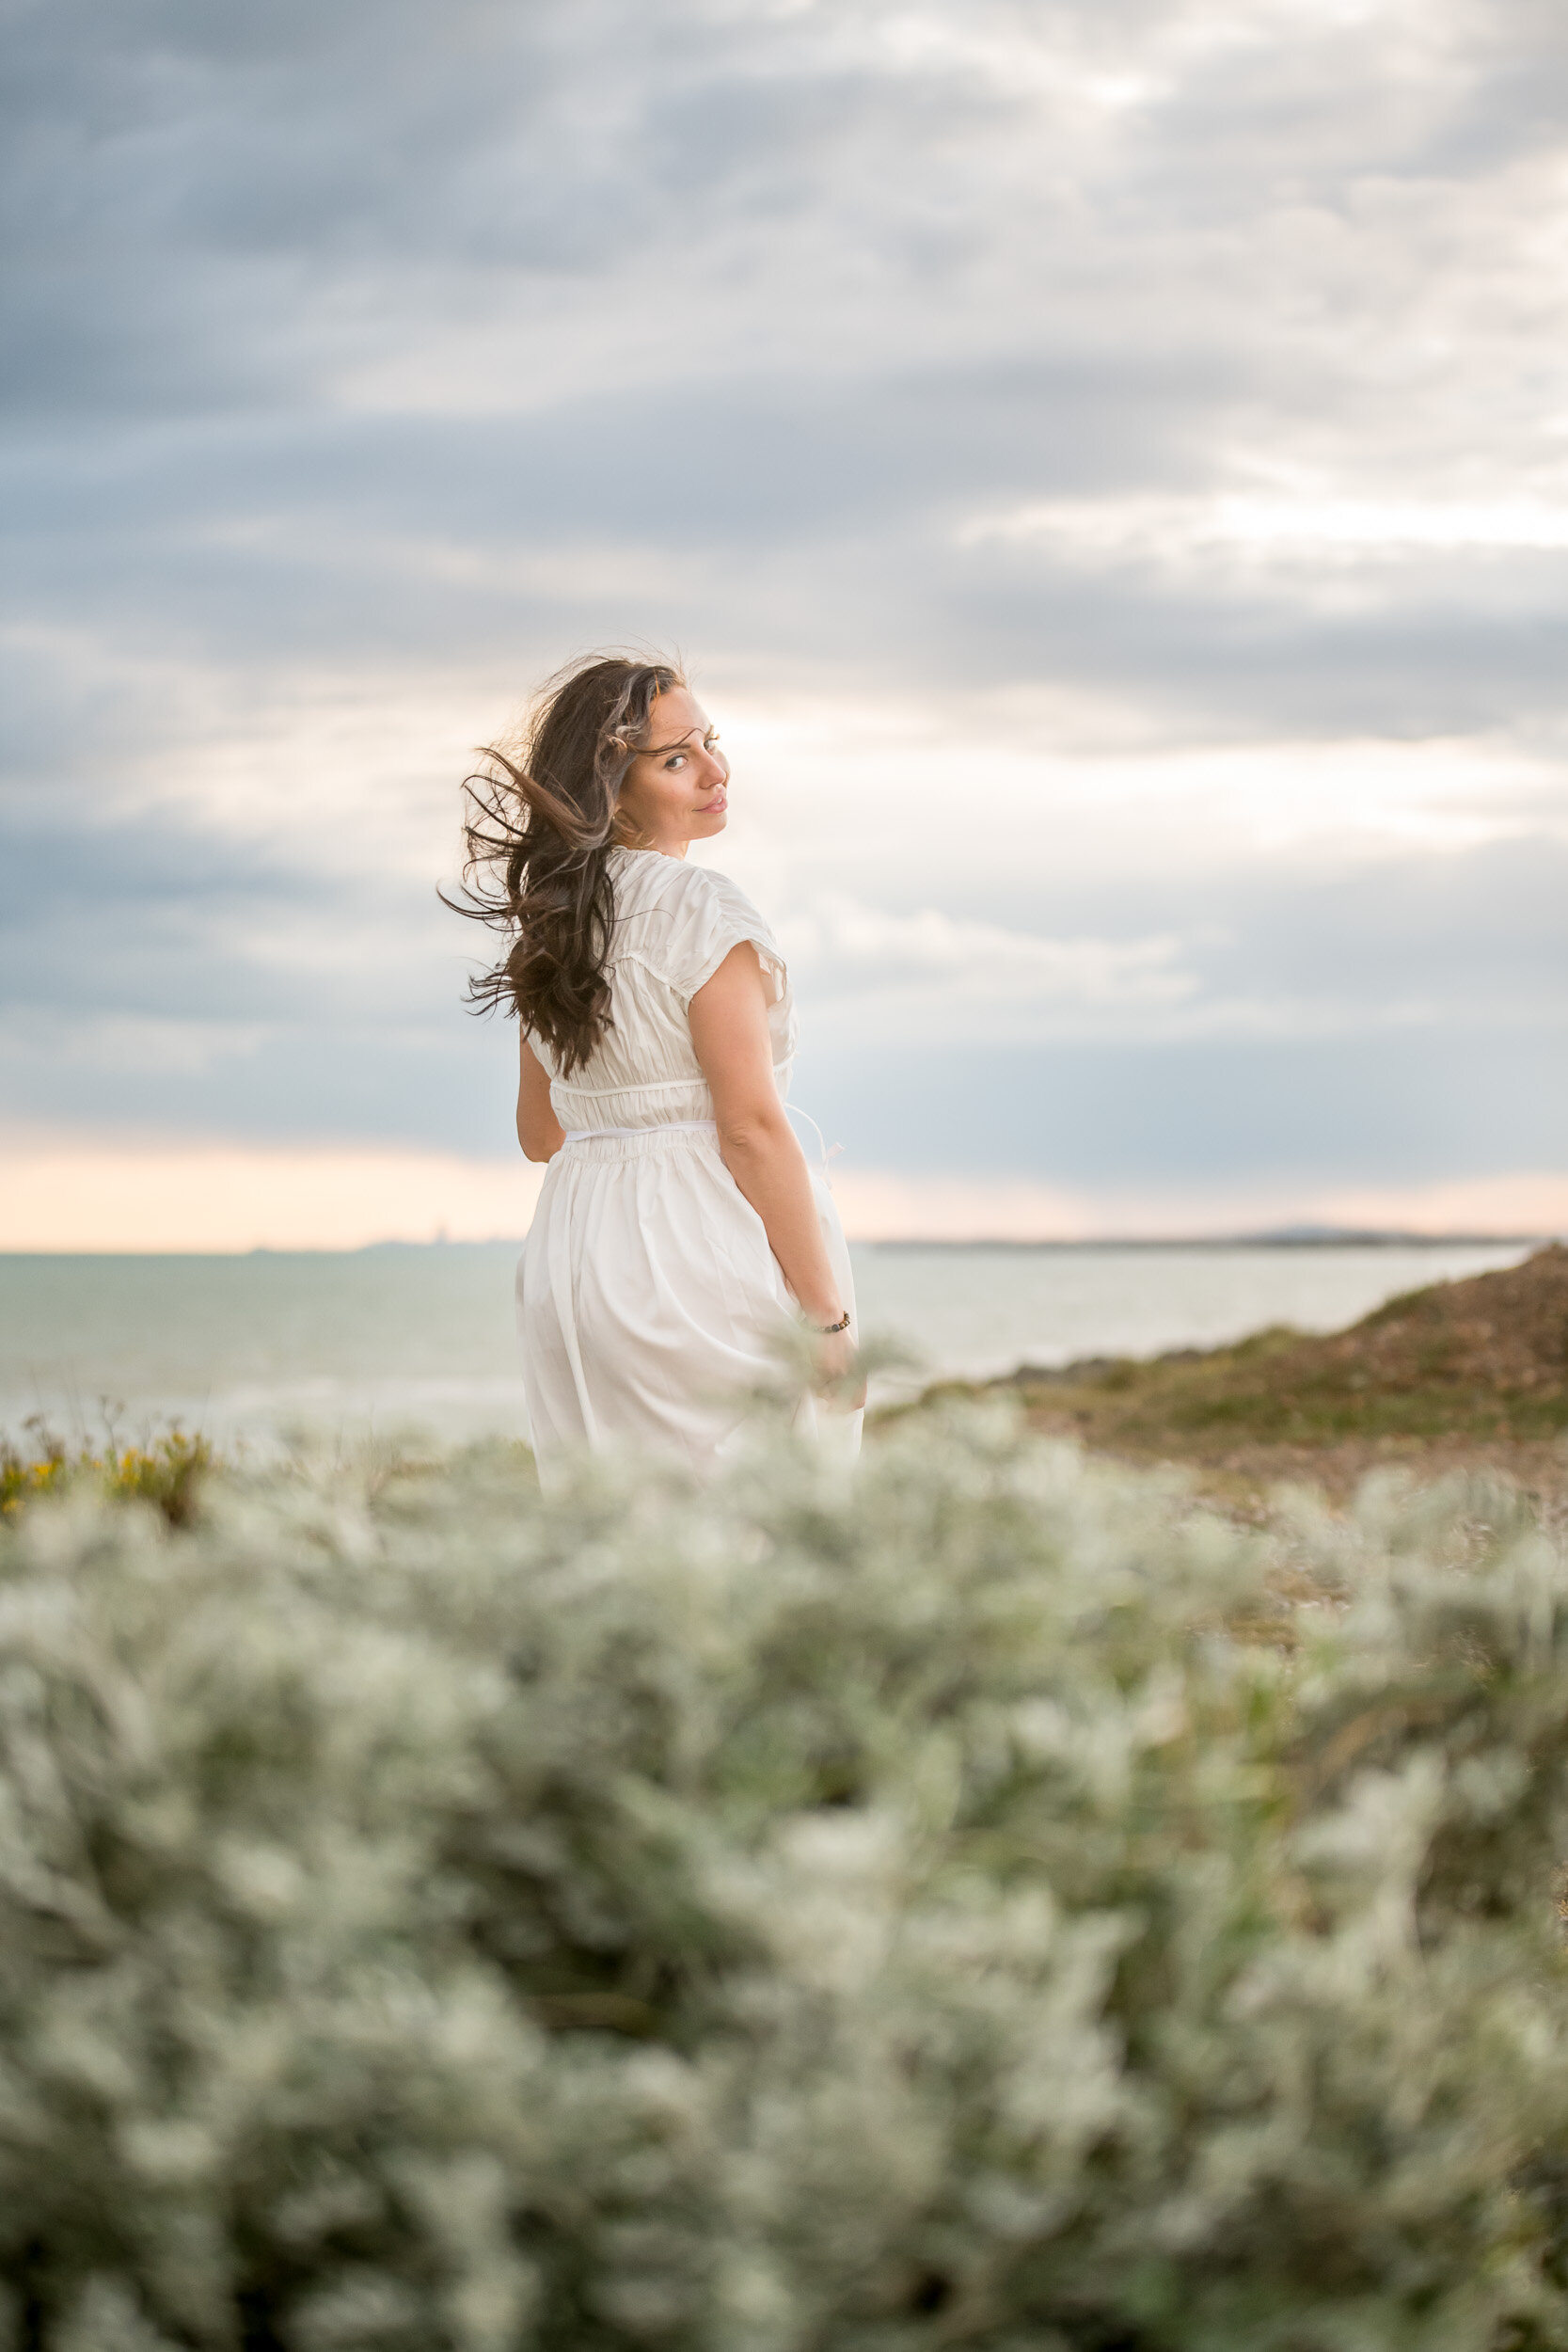 Soulful Relaxed Outdoor Brand Lifestyle Portrait Photosession with Sussex Brighton Hove Female Photographer